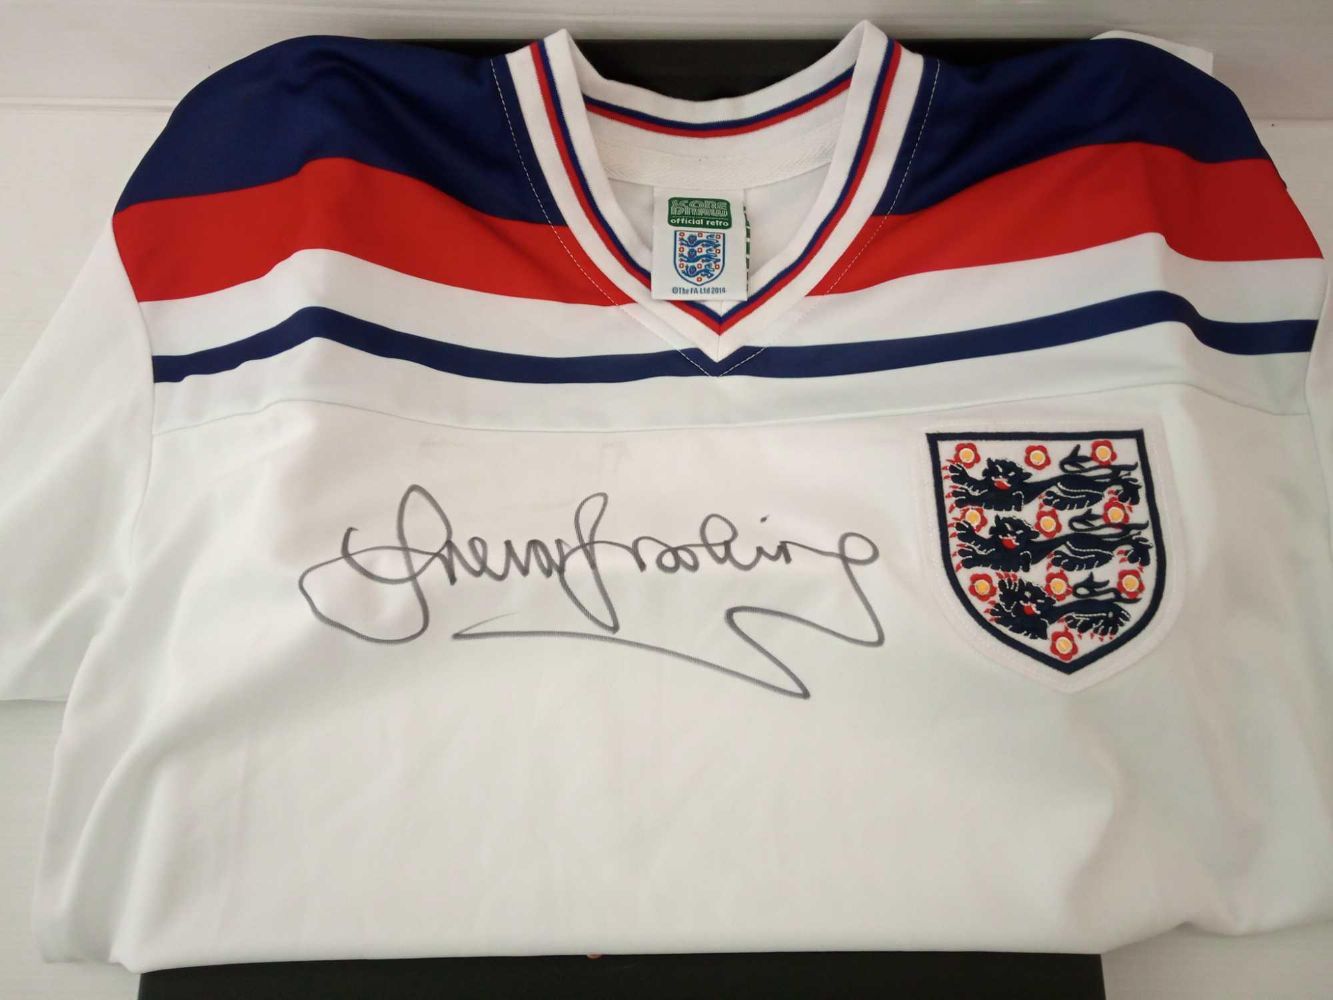 No Reserve - Sporting Memorabilia Auction! 21st May 2021